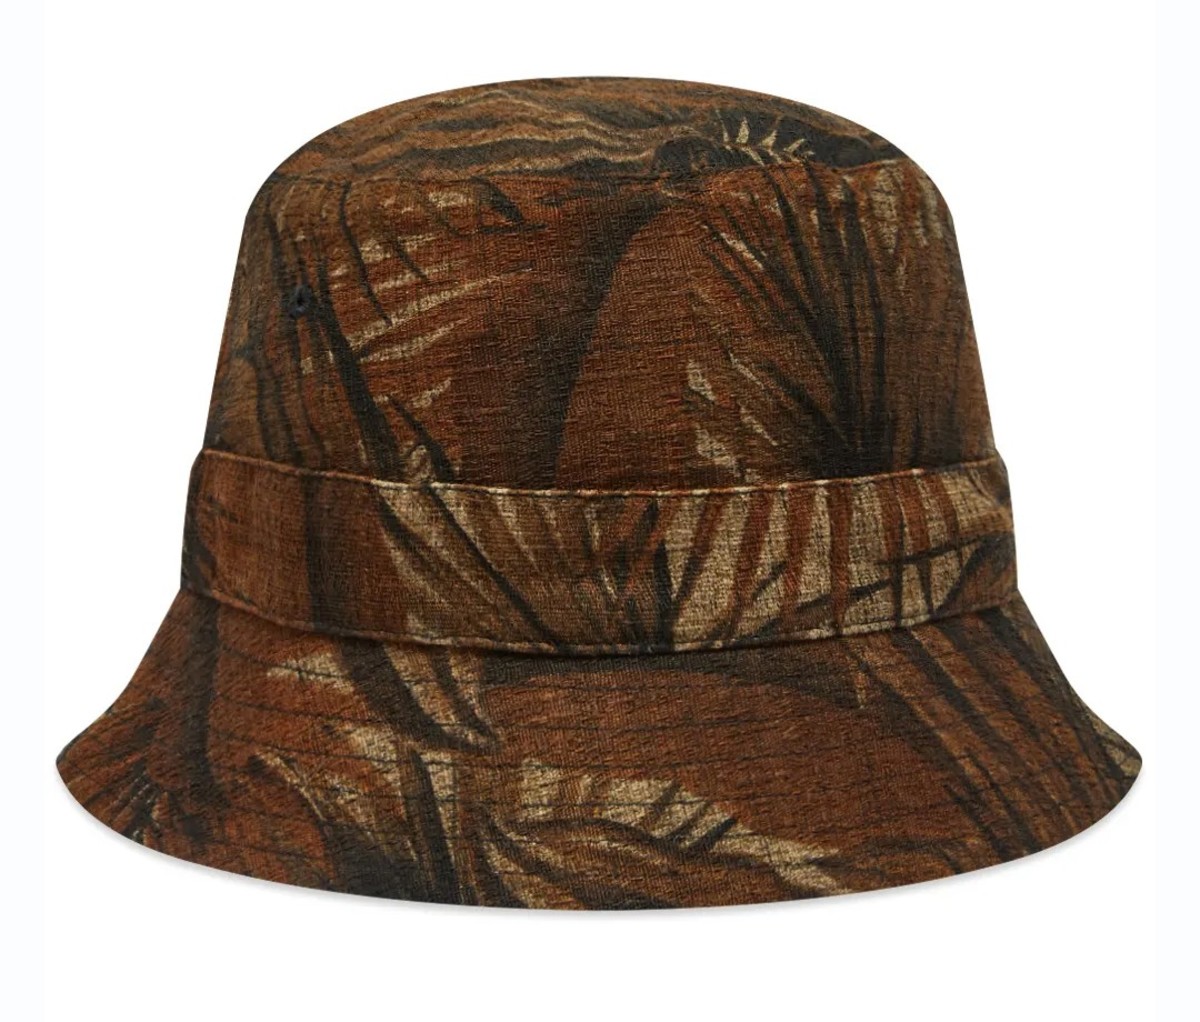 Stylish Bucket Hats for Men to Wear All Summer Long